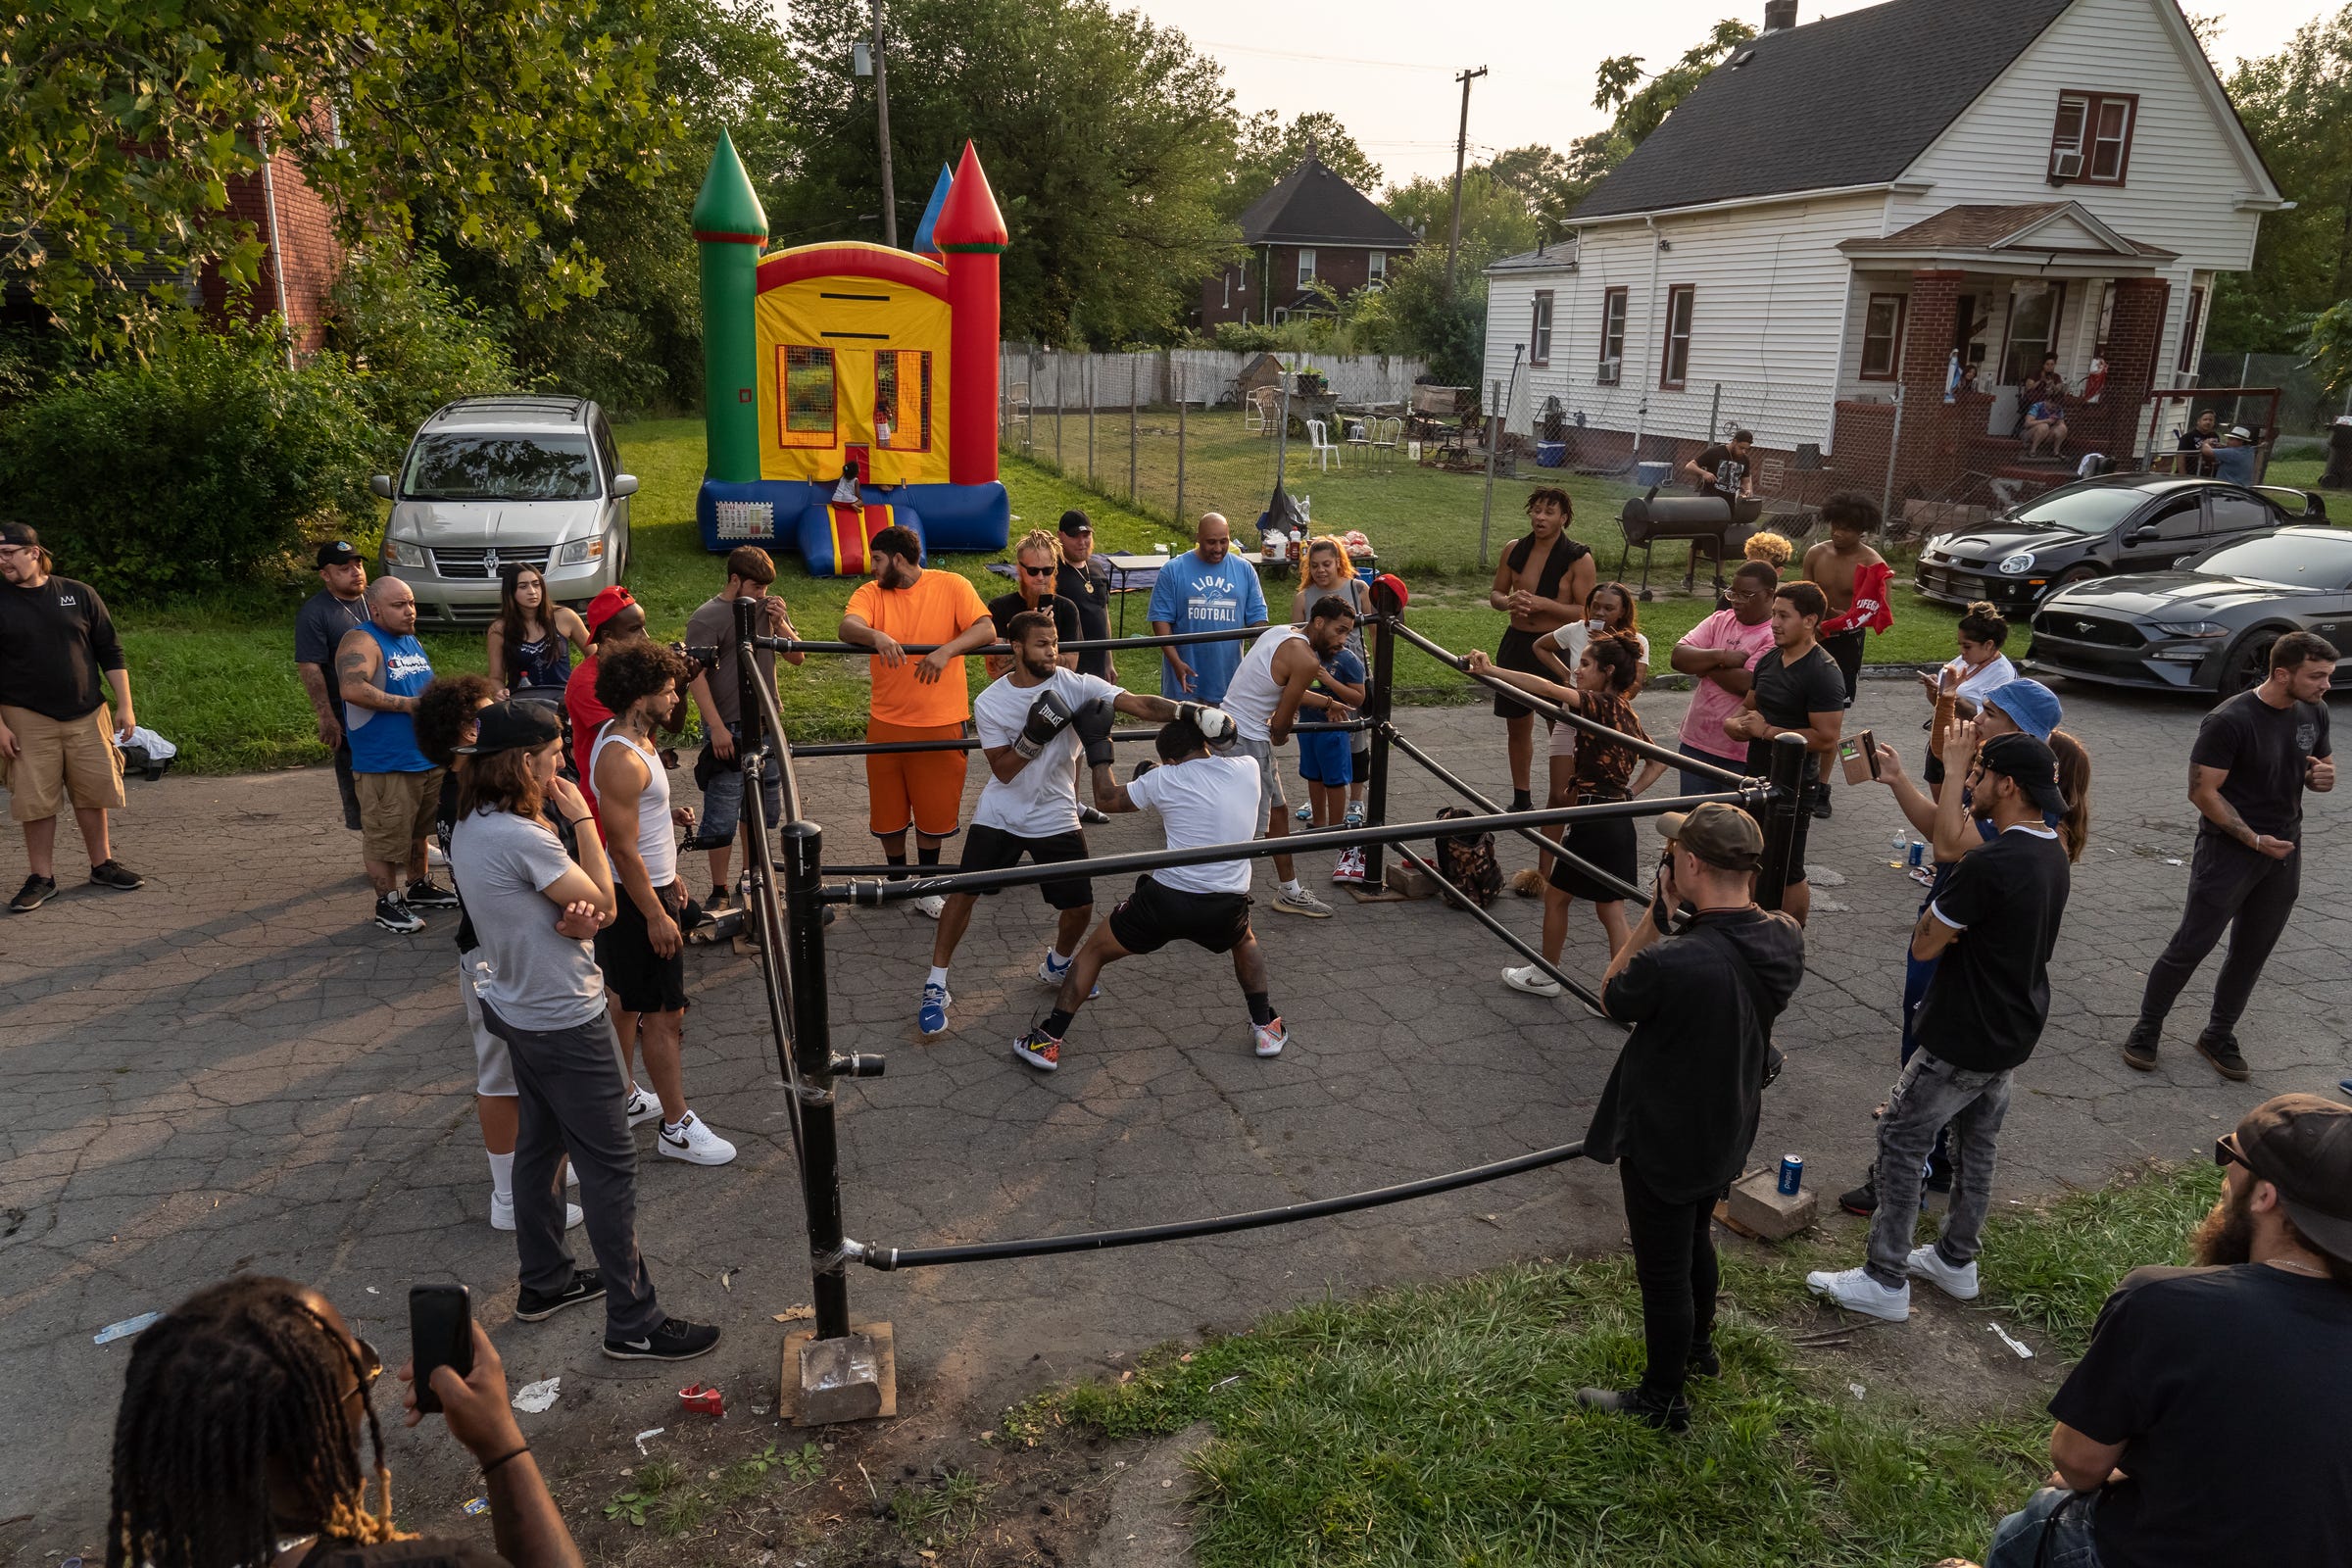 People take part in a boxing match during a Pick Your Poison Detroit event in Detroit's Delray neighborhood on Sunday, July 18, 2021.